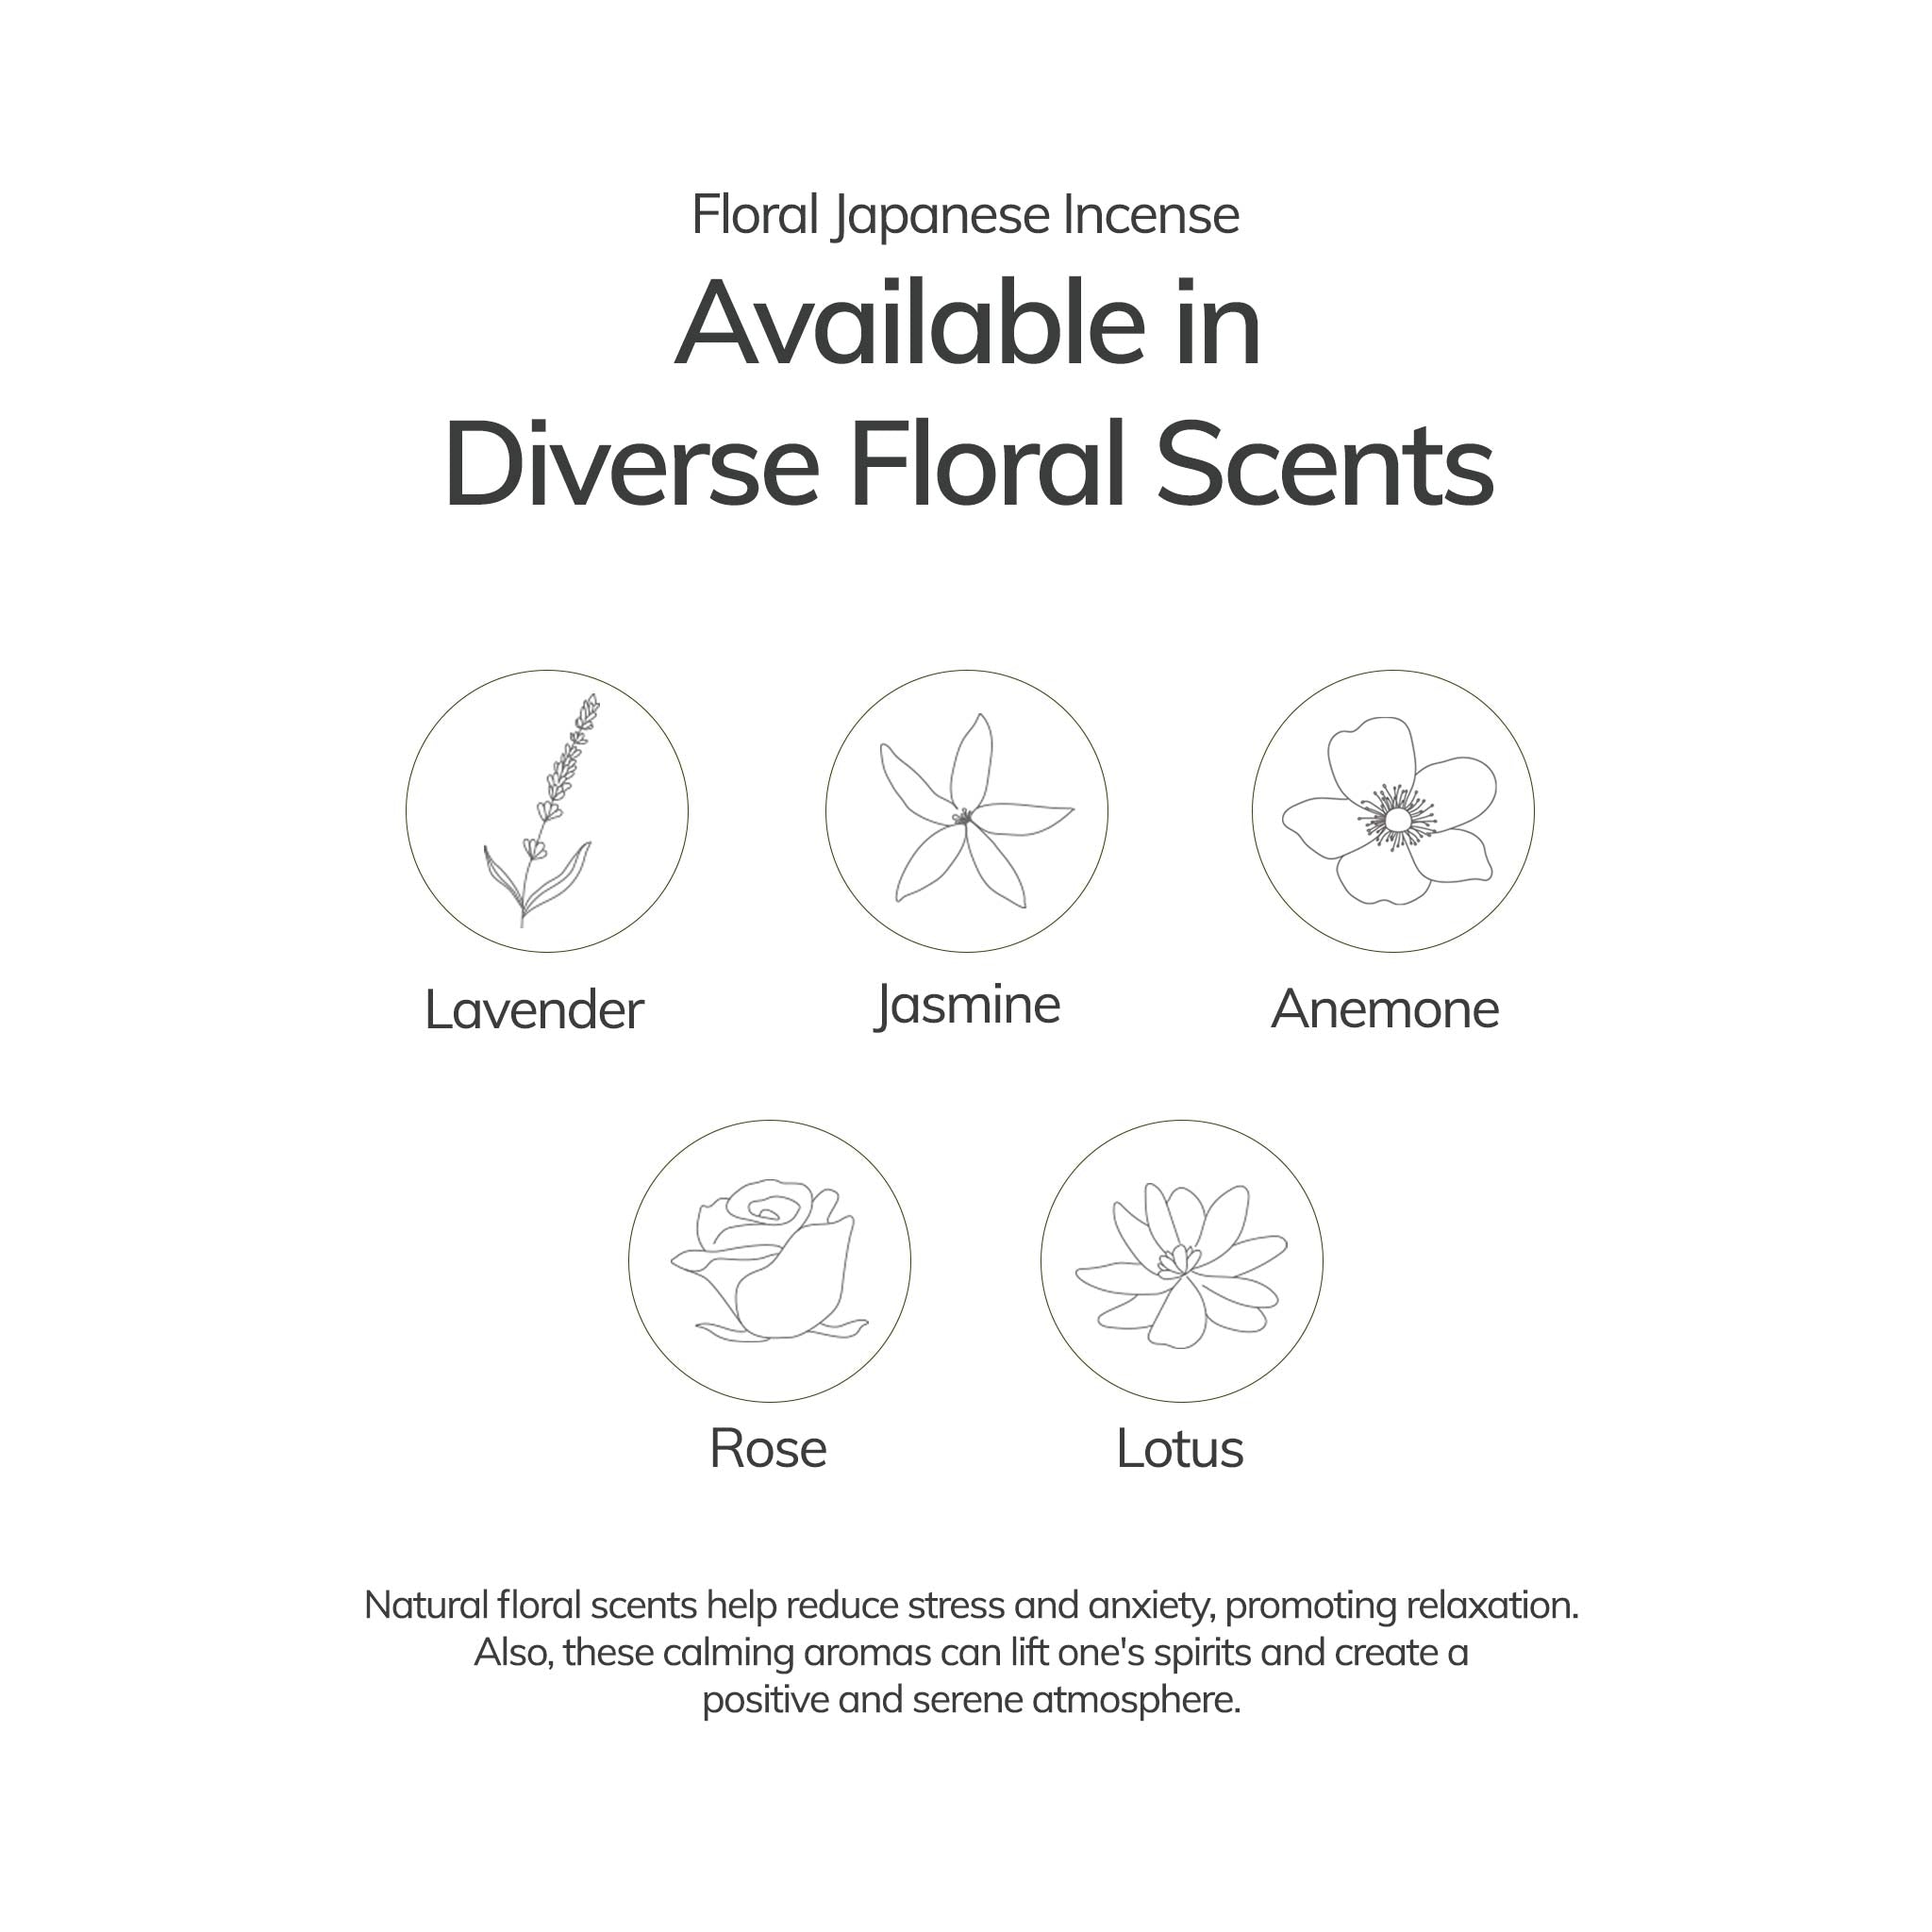 Floral scents such as lavender, jasmine, anemone, rose, lotus